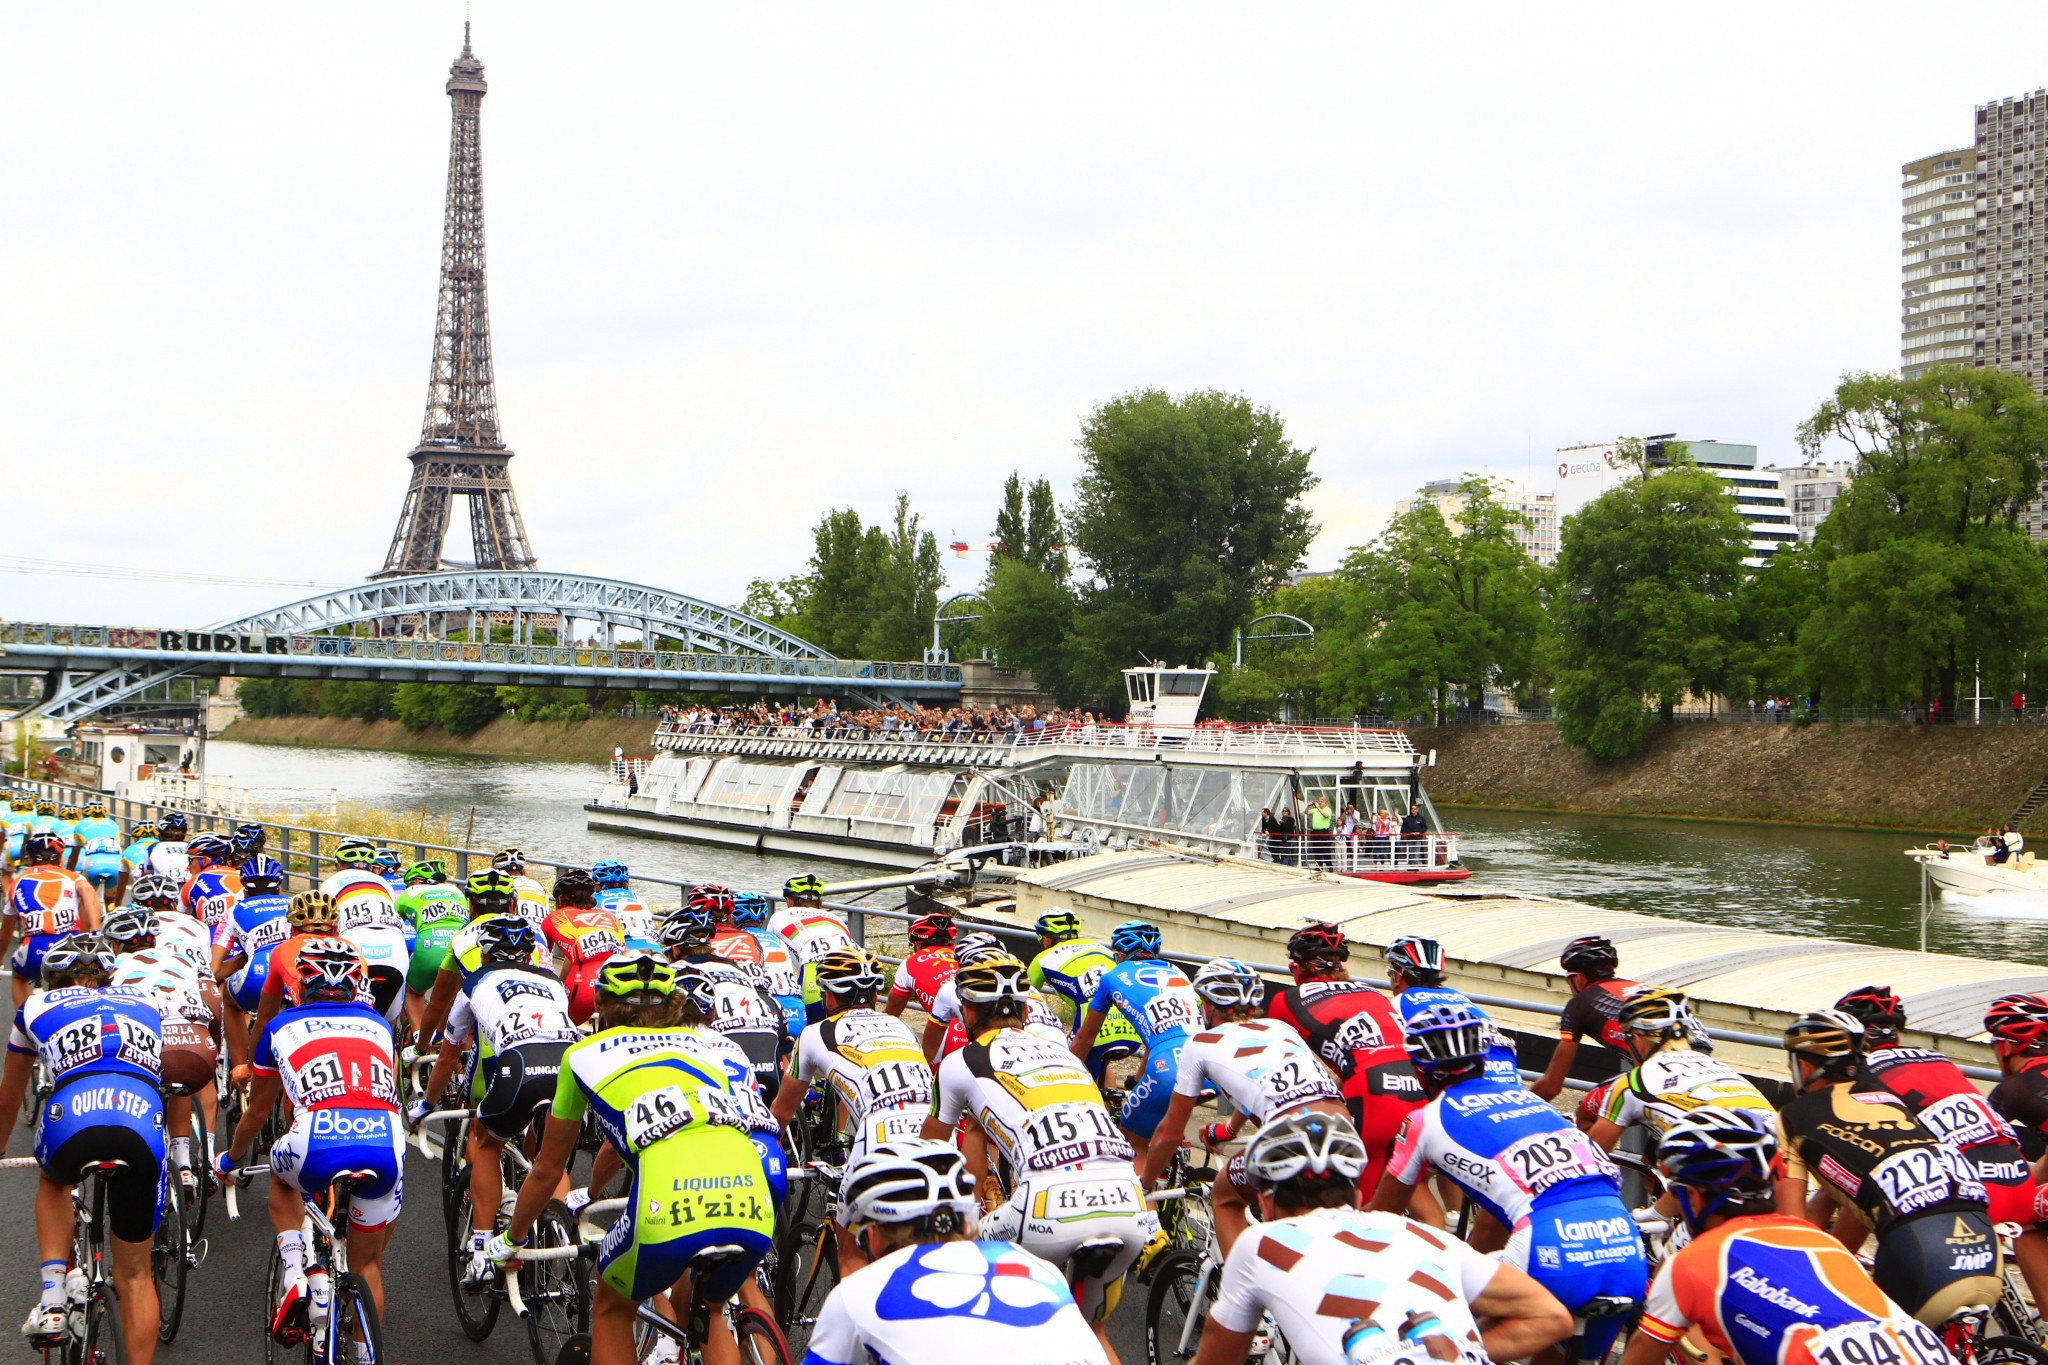 New dates have been confirmed for the Tour de France ©Getty Images